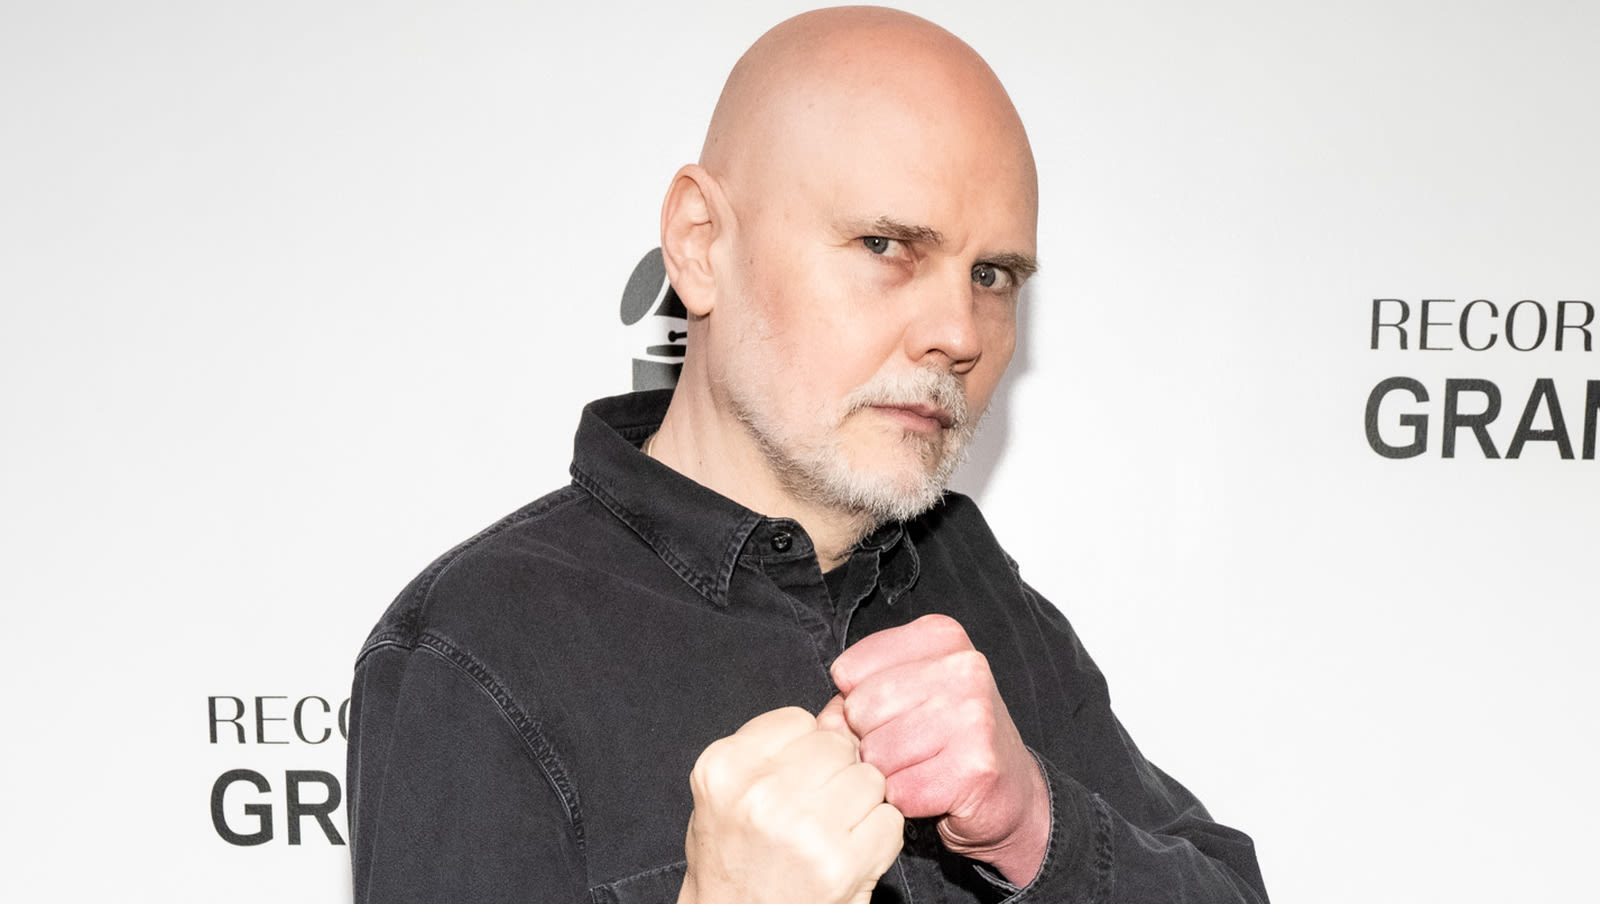 NWA Owner Billy Corgan On Finding The 'Next Nick Aldis' For His Promotion - Wrestling Inc.